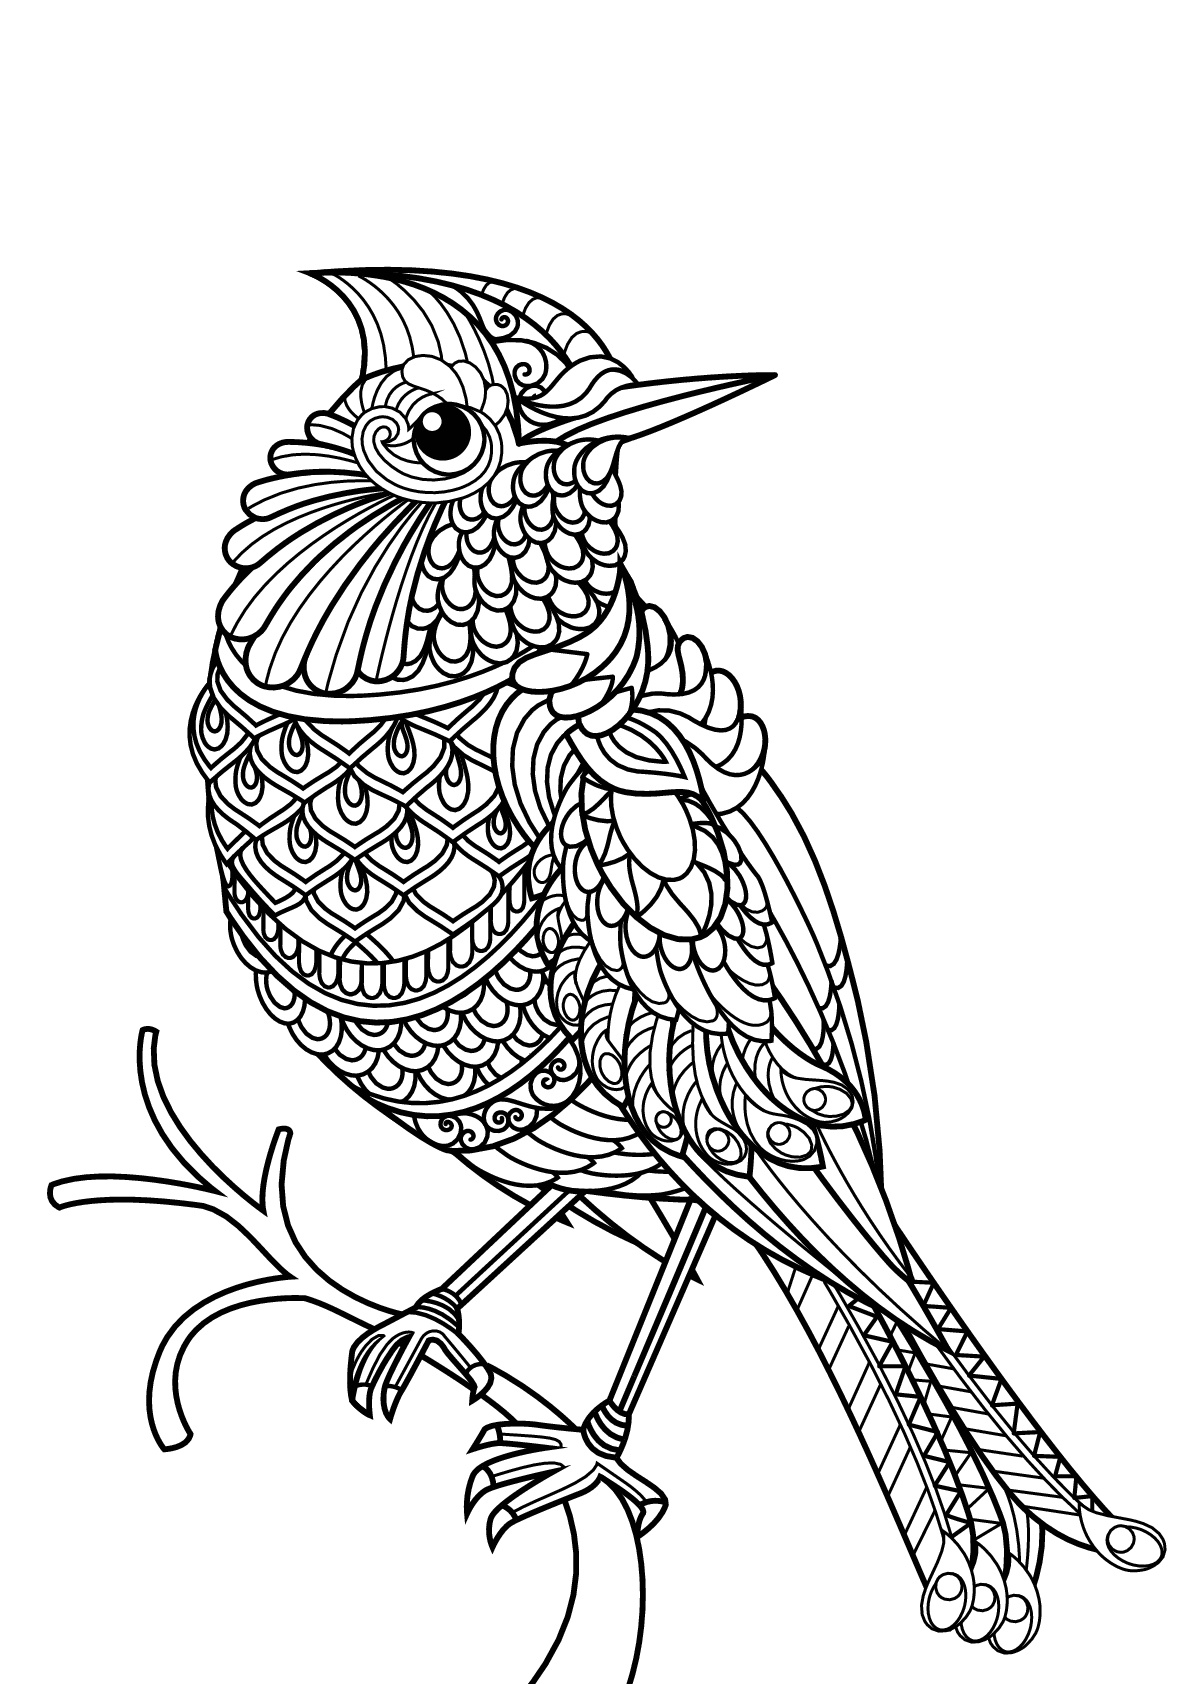 Download Free book bird - Birds Adult Coloring Pages